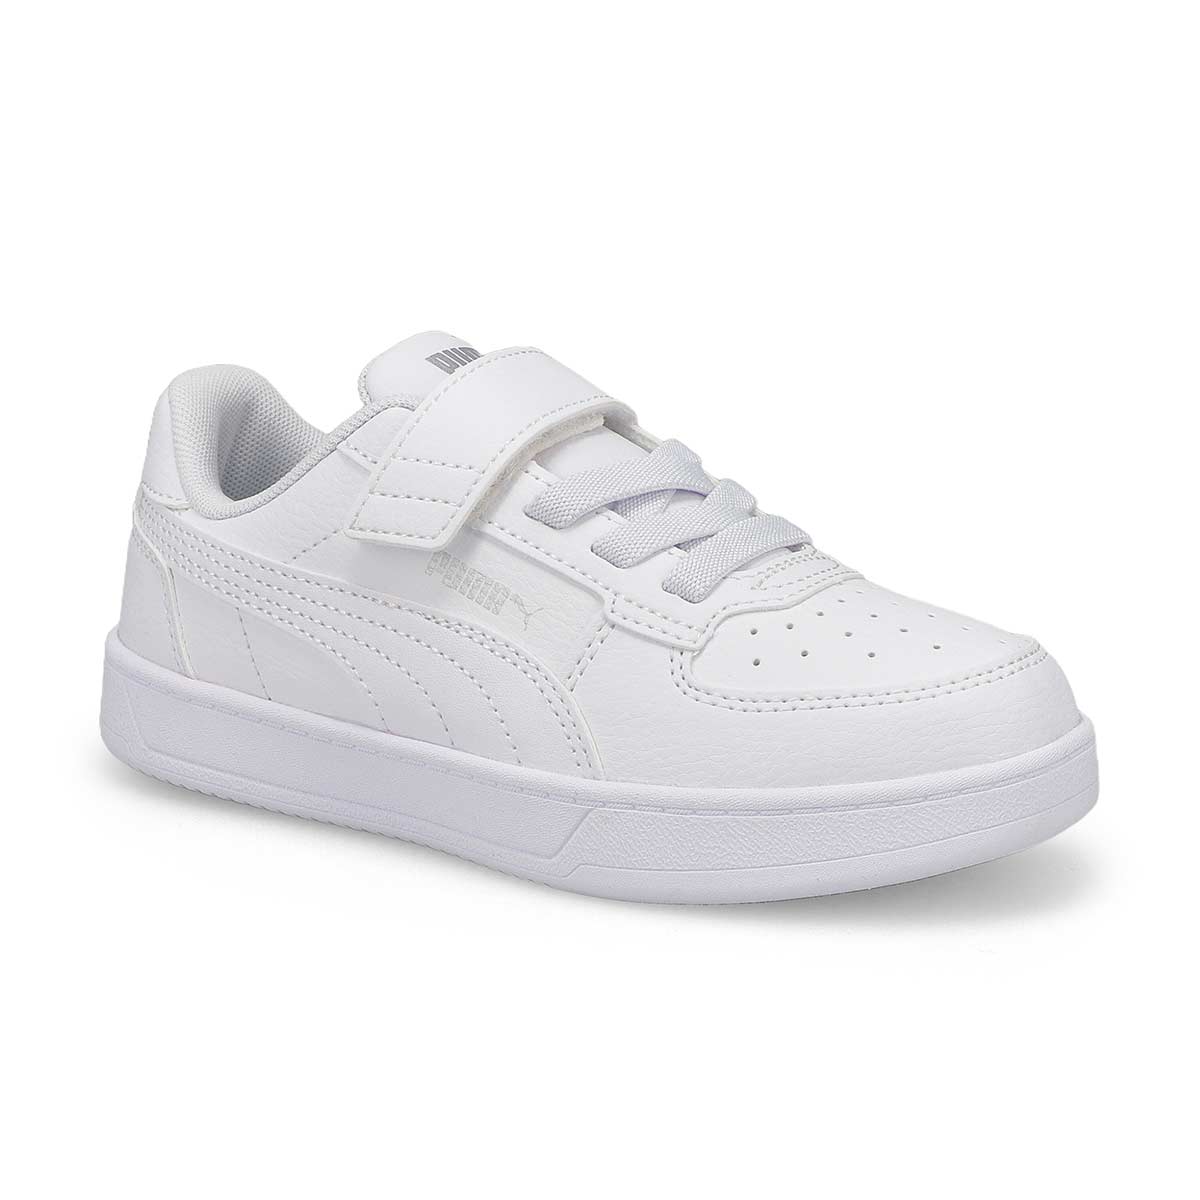 Kids' Caven 2.0 AC + PS Lace Up Sneaker - White/Si